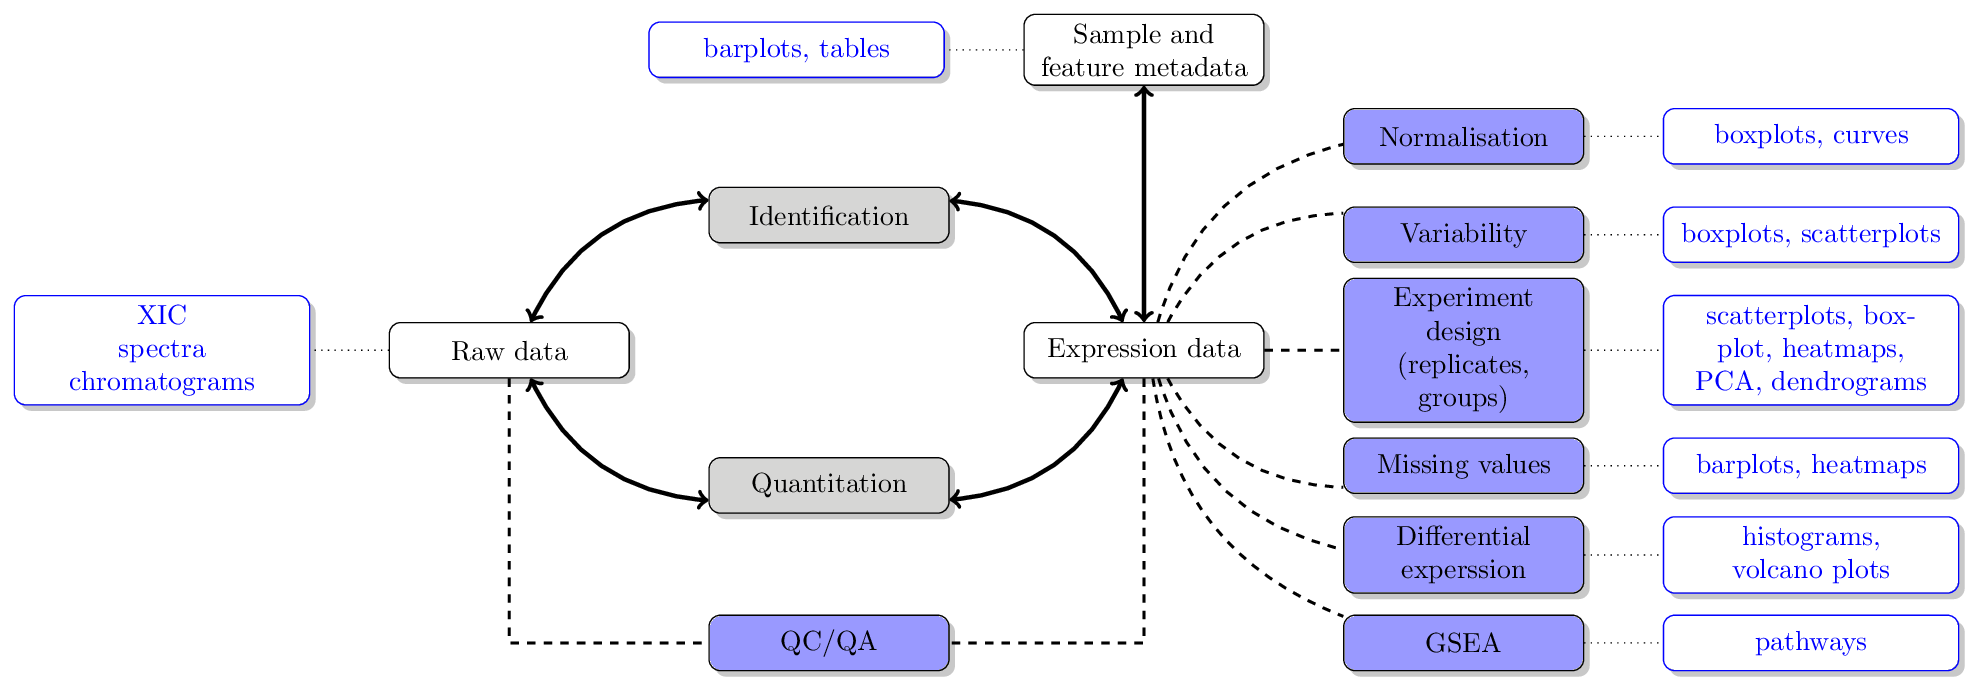 A typical proteomics data processing and analysis workflow